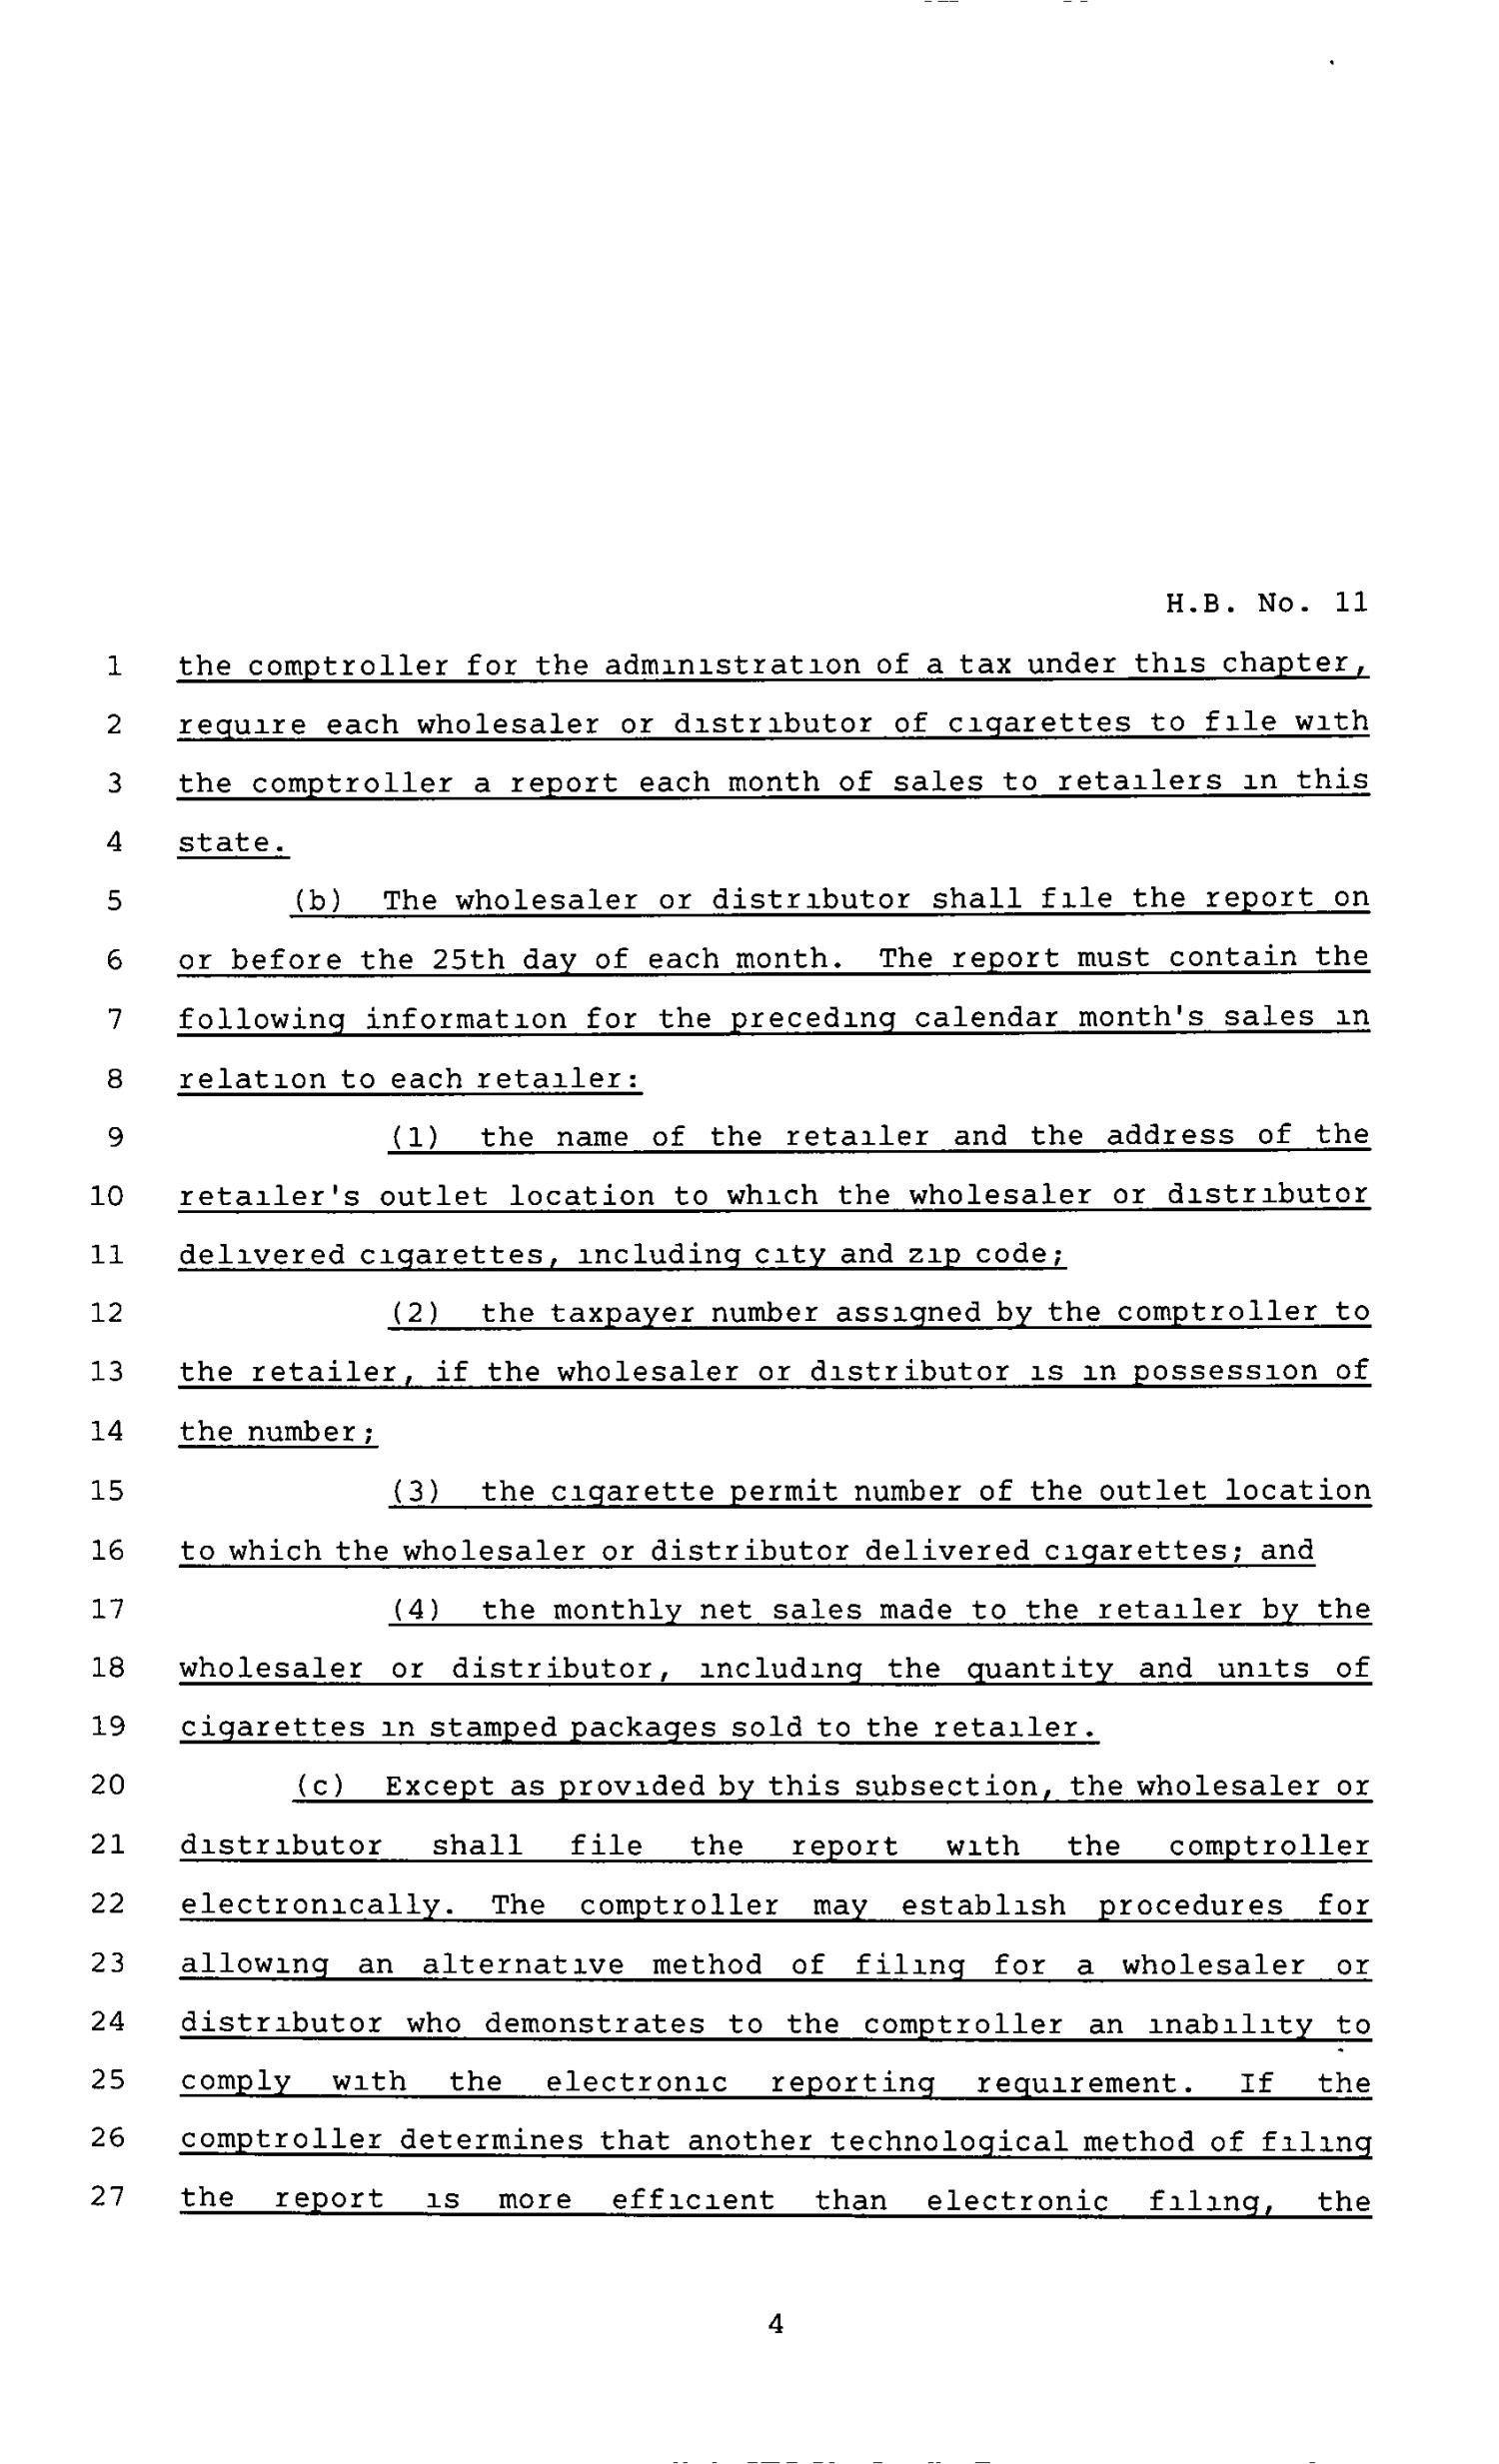 80th Texas Legislature, Regular Session, House Bill 11, Chapter 129
                                                
                                                    [Sequence #]: 4 of 7
                                                